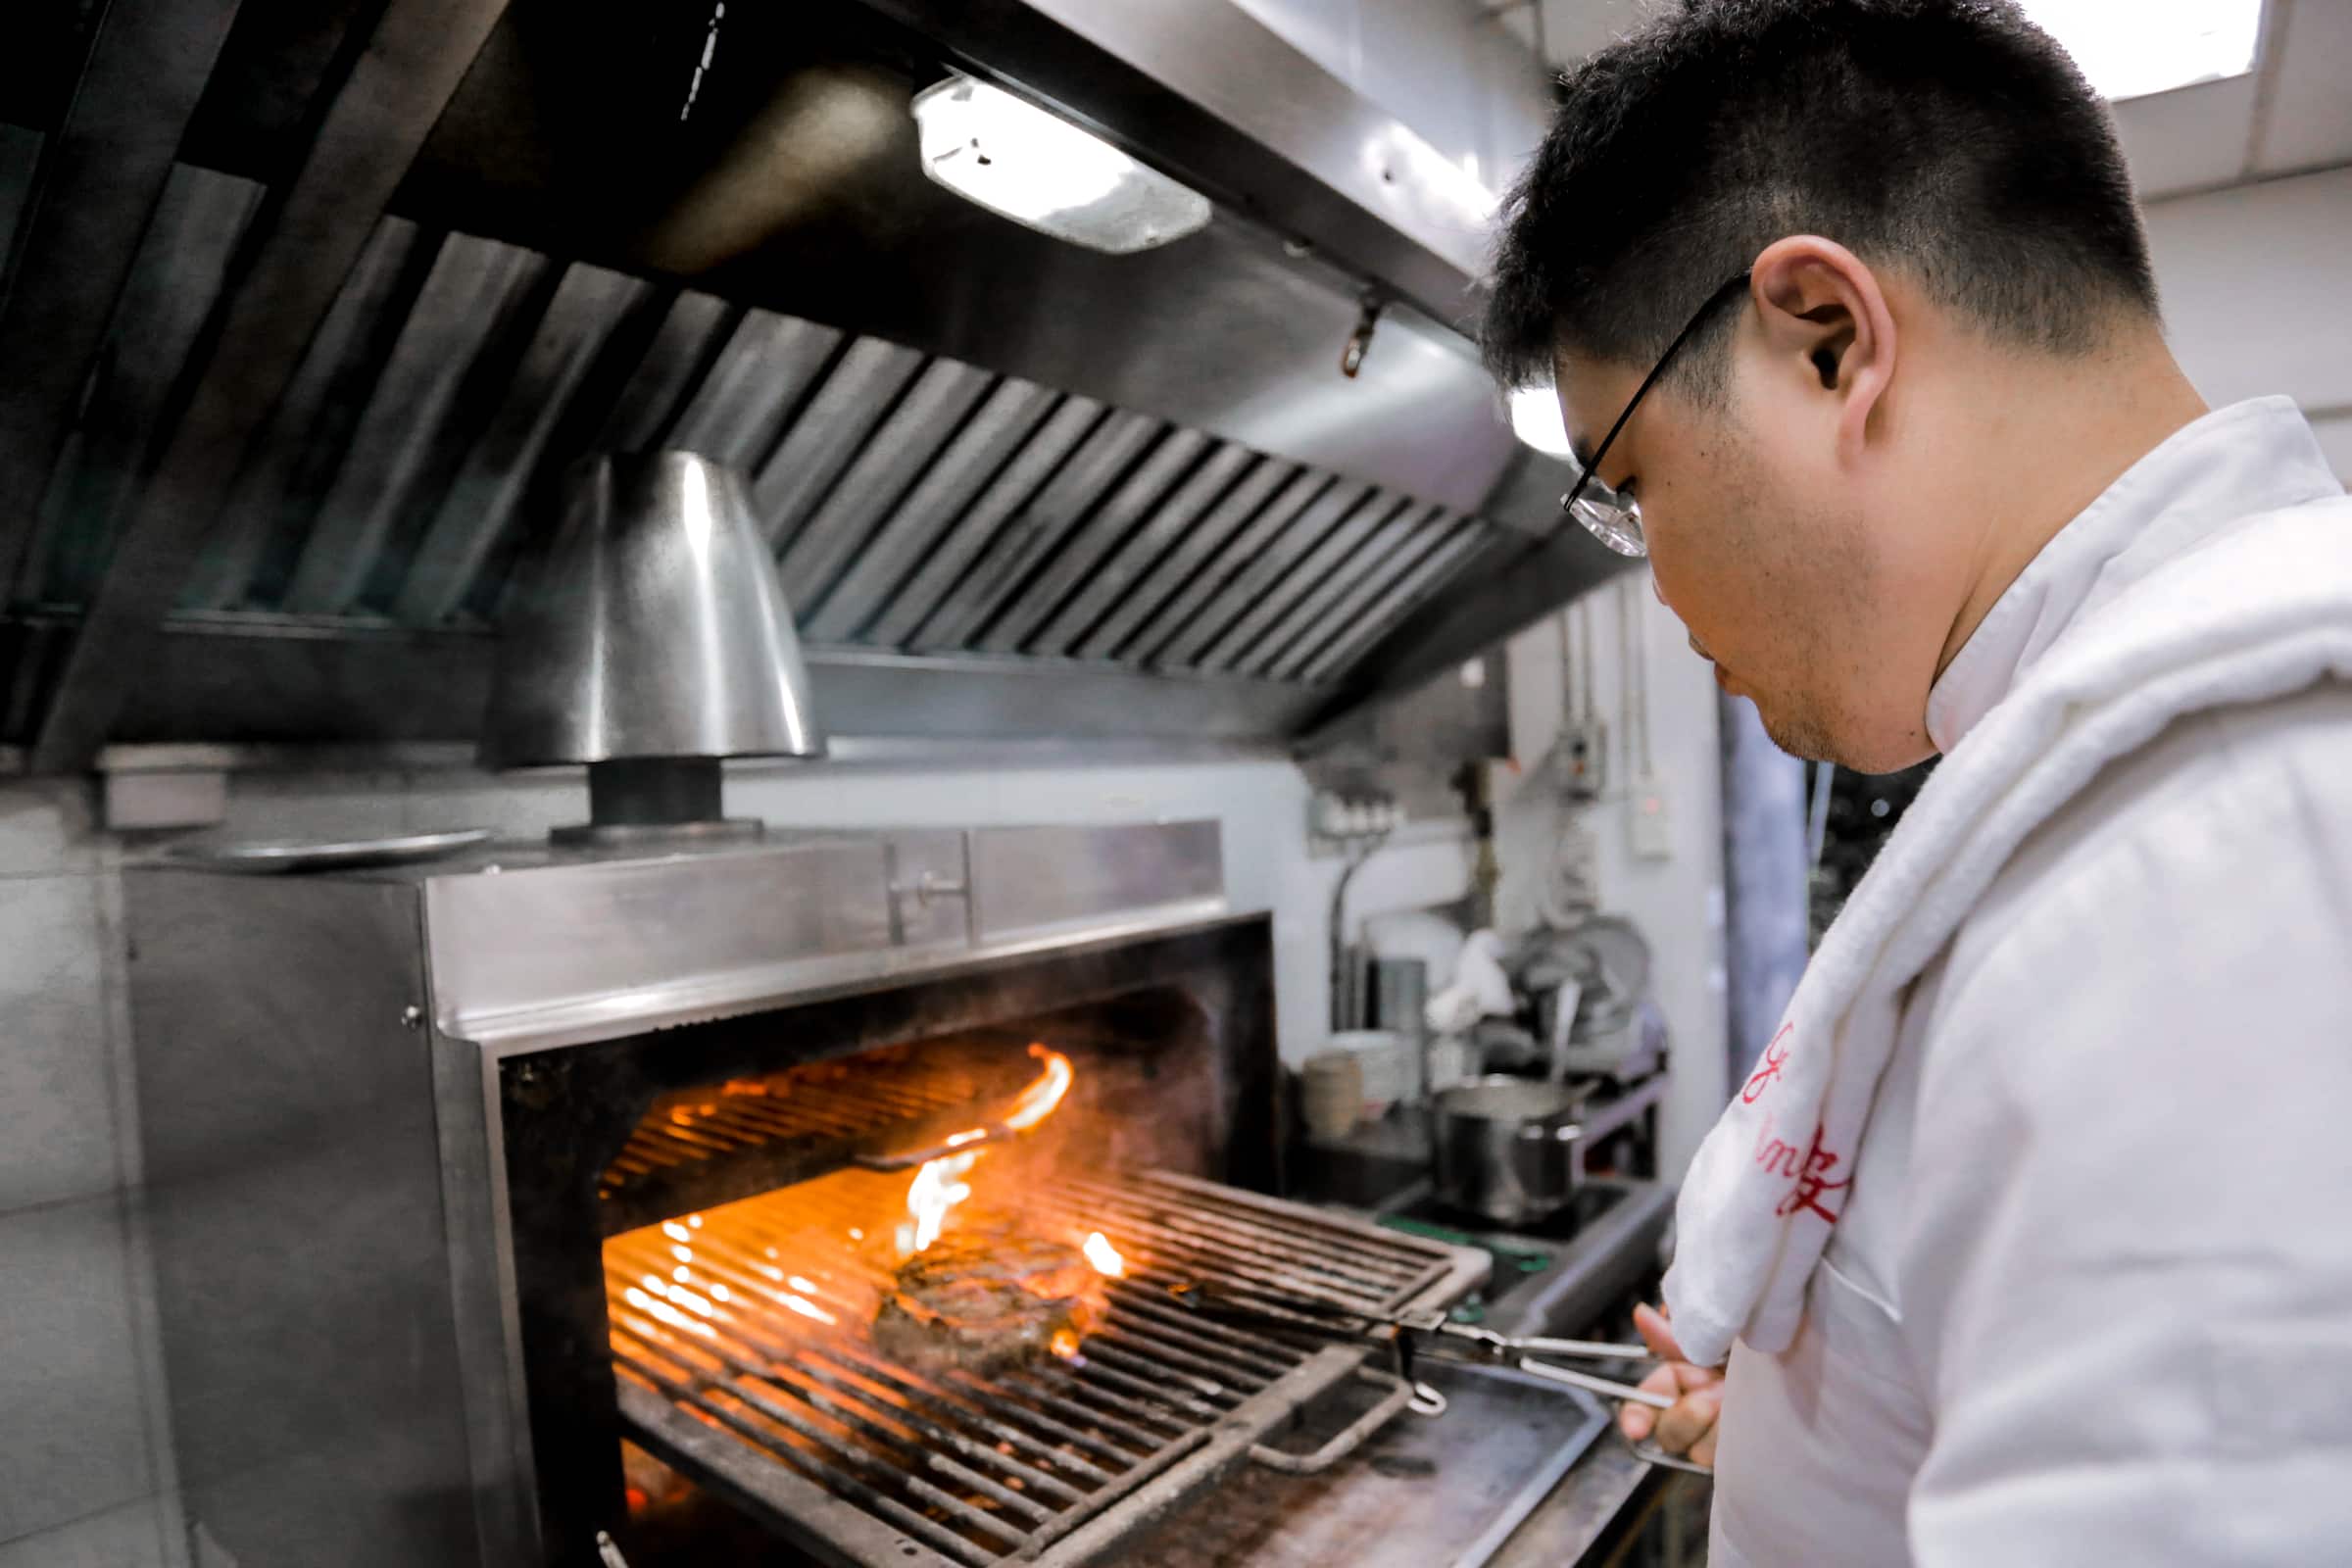 A chef flame-grilling meat in a kitchen.